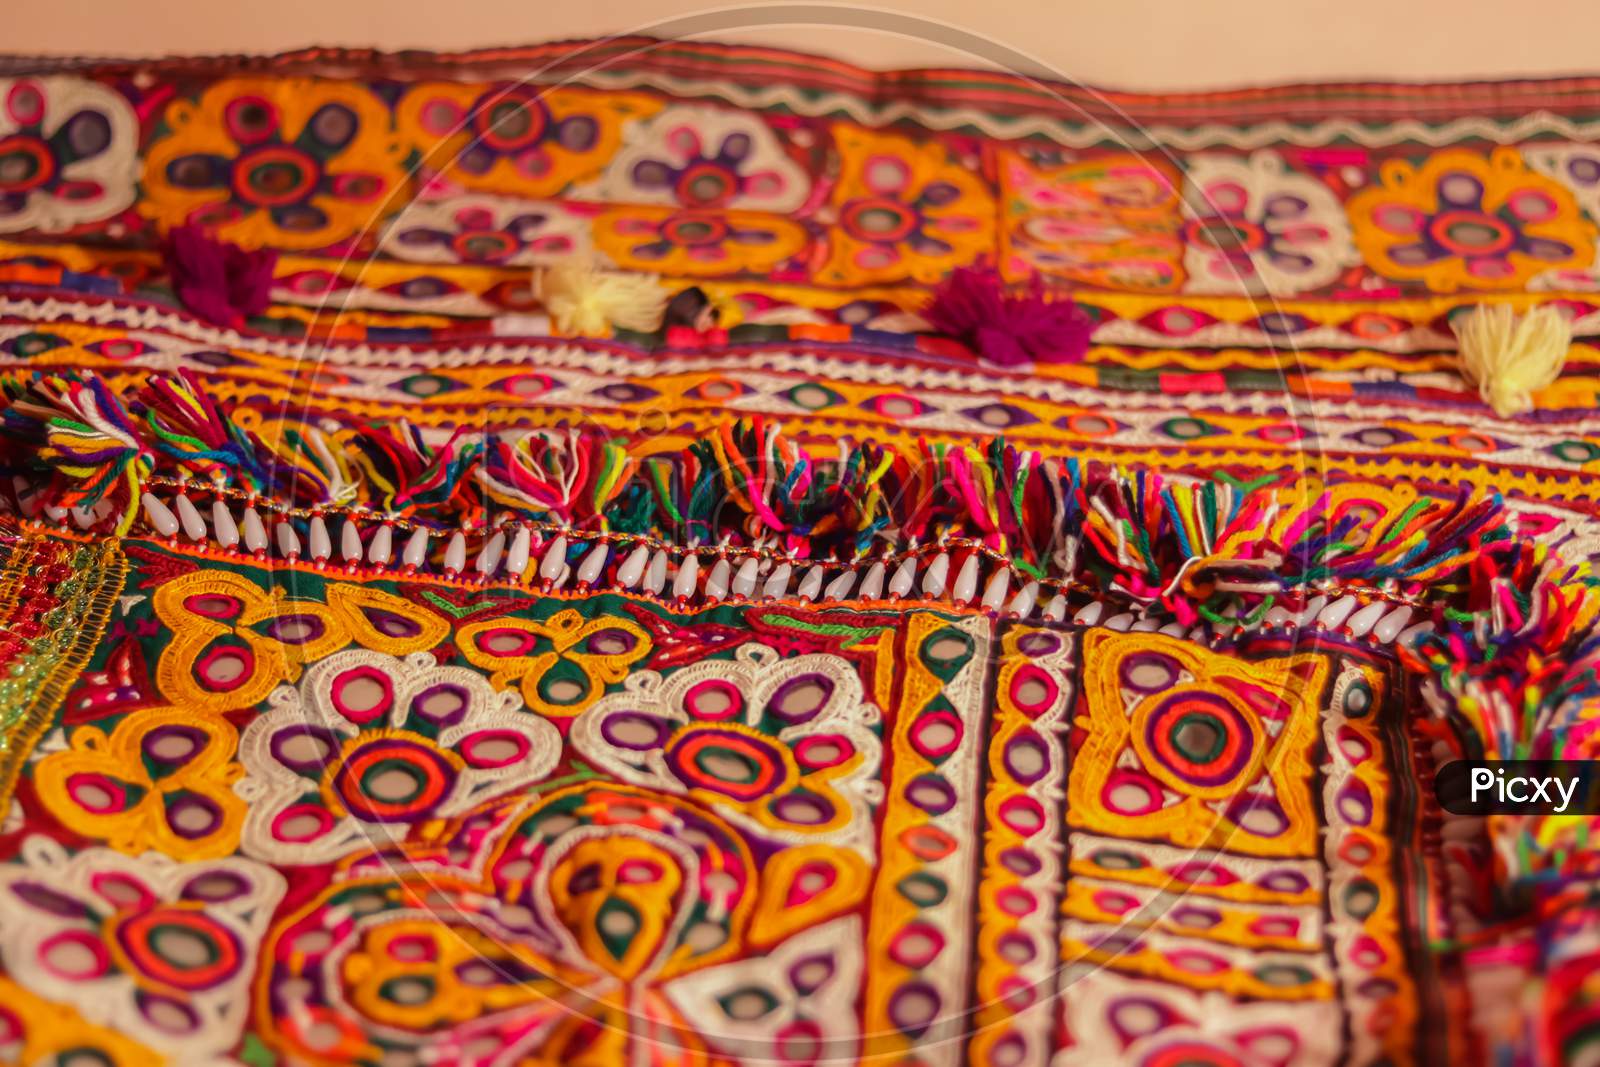 Hd Quality Footage Of Embroidery,Colorful Handmade Ahir Bharat, Kutchhi Bharat,Mirrored Embroidery Work Typical Of The Ahir Tribe In Gujarat, India,